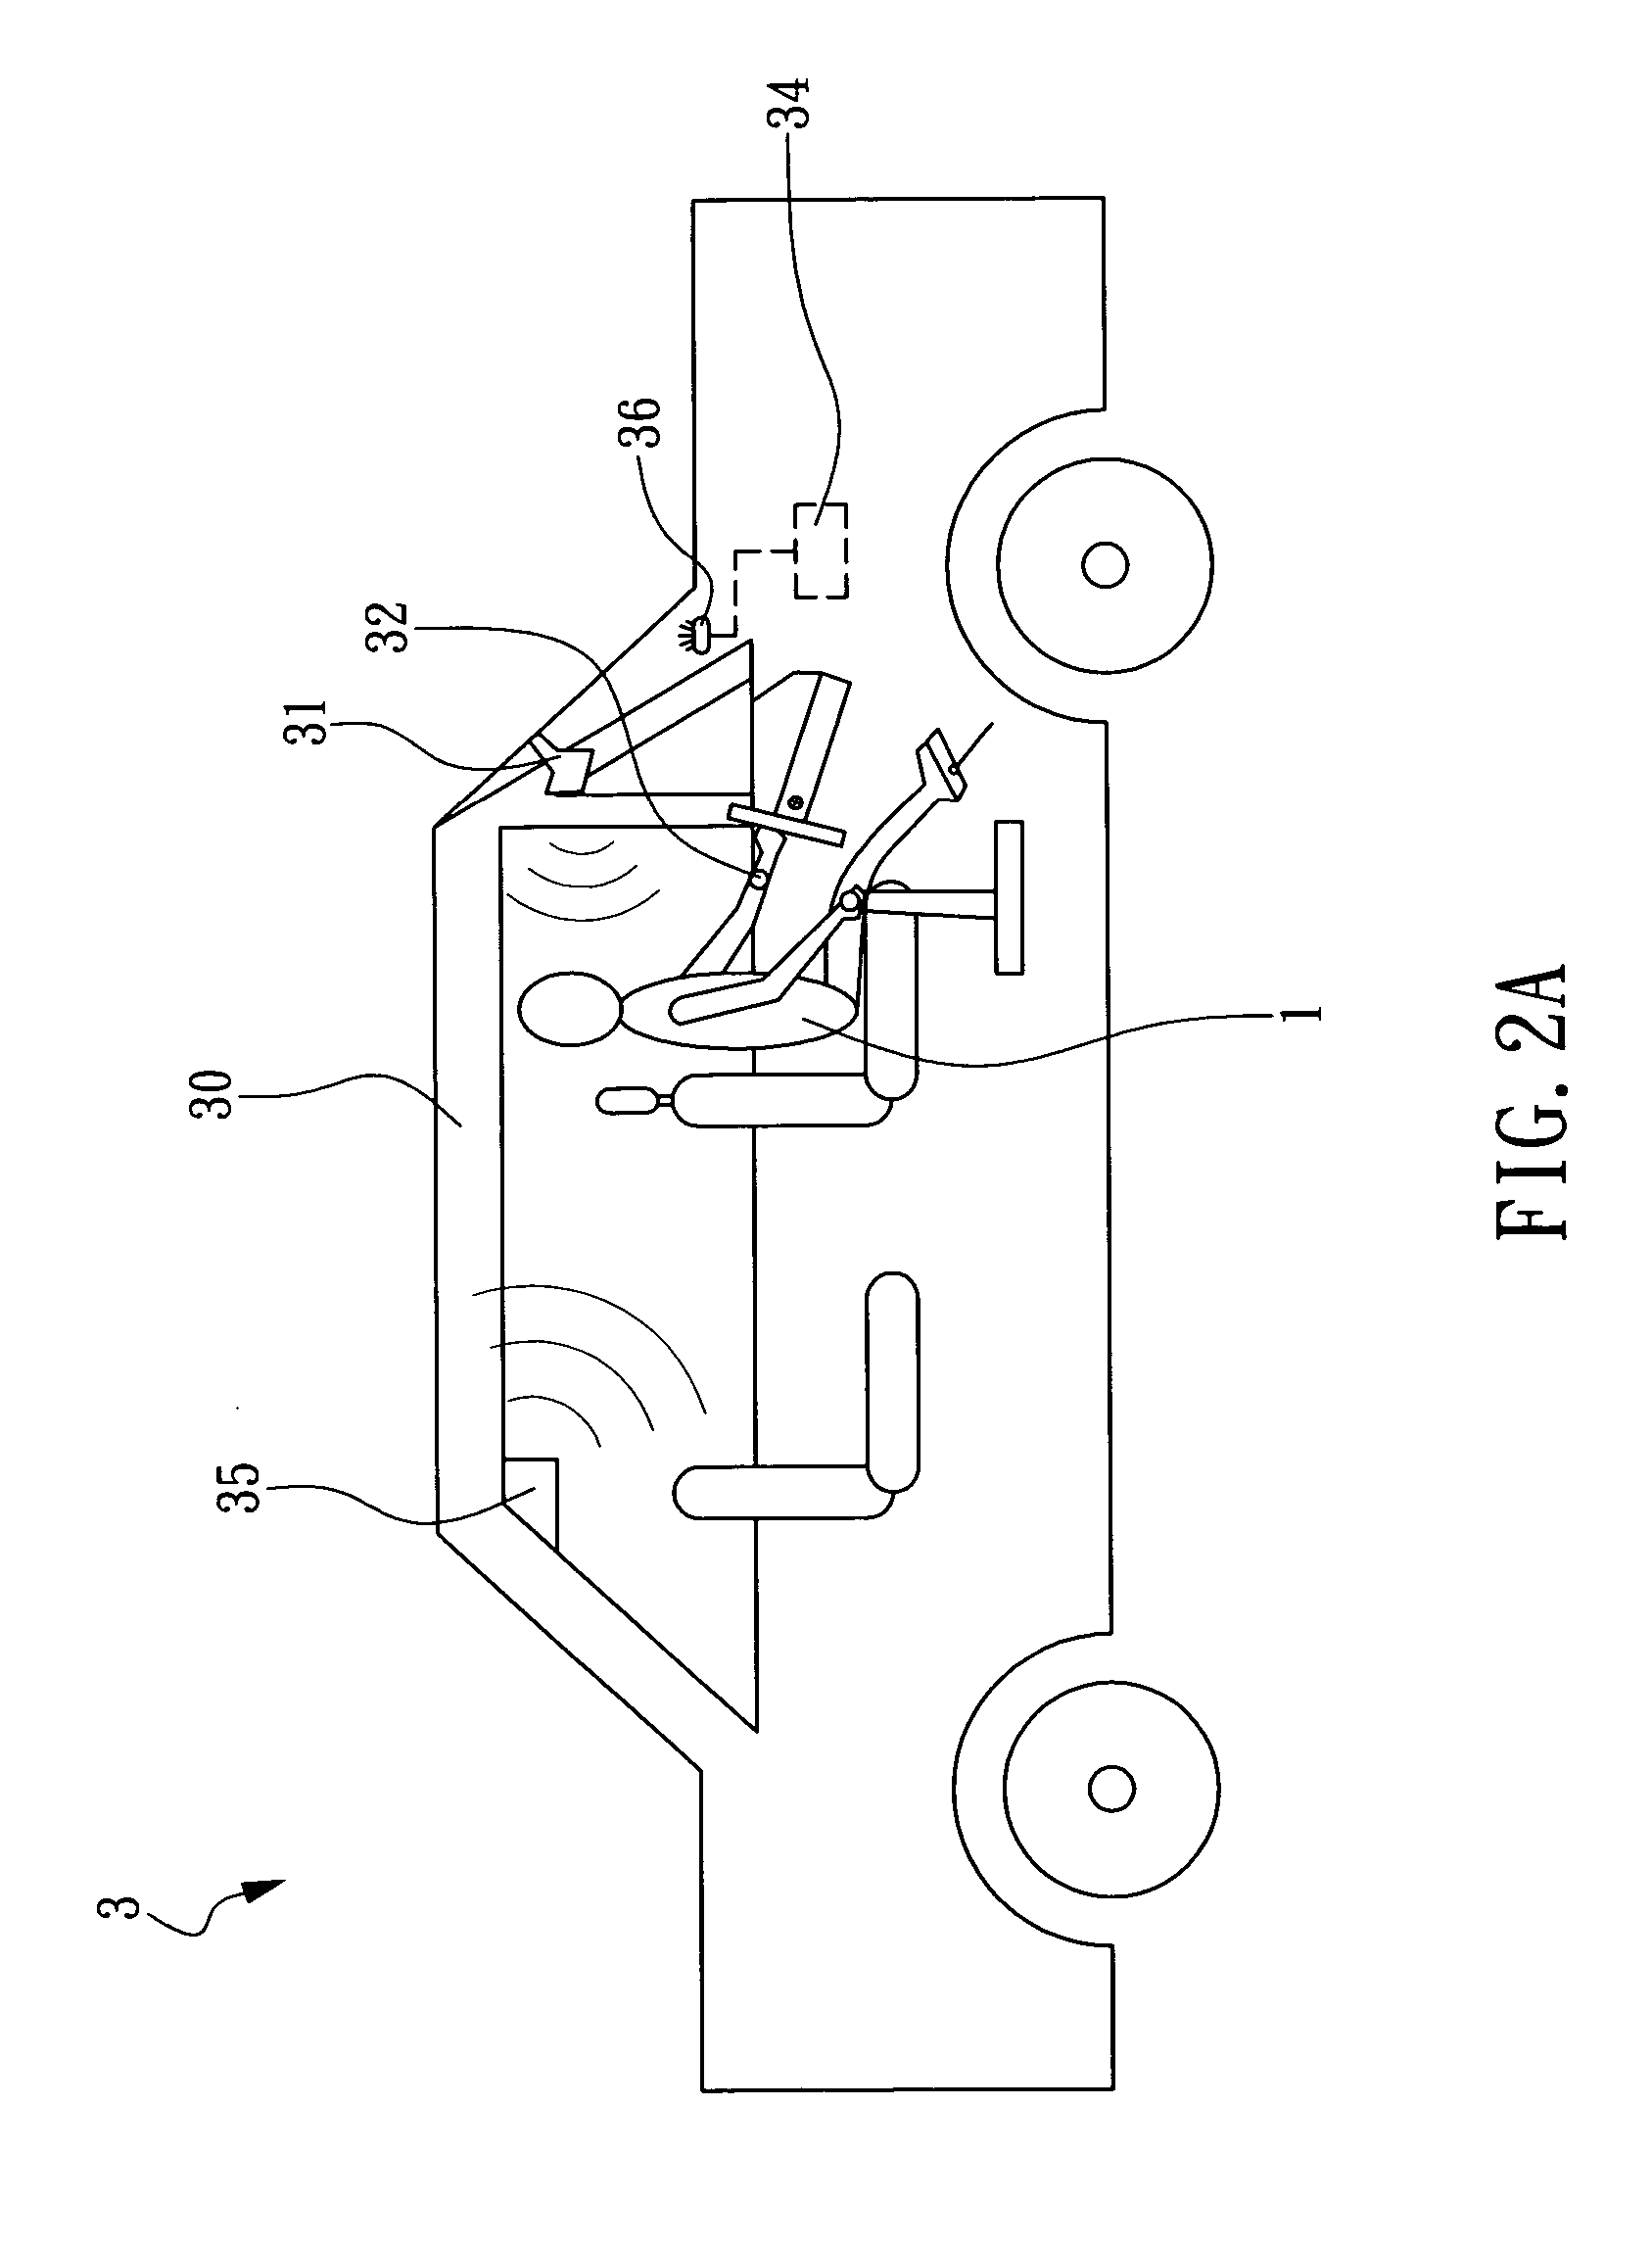 Physiological status monitoring system and method